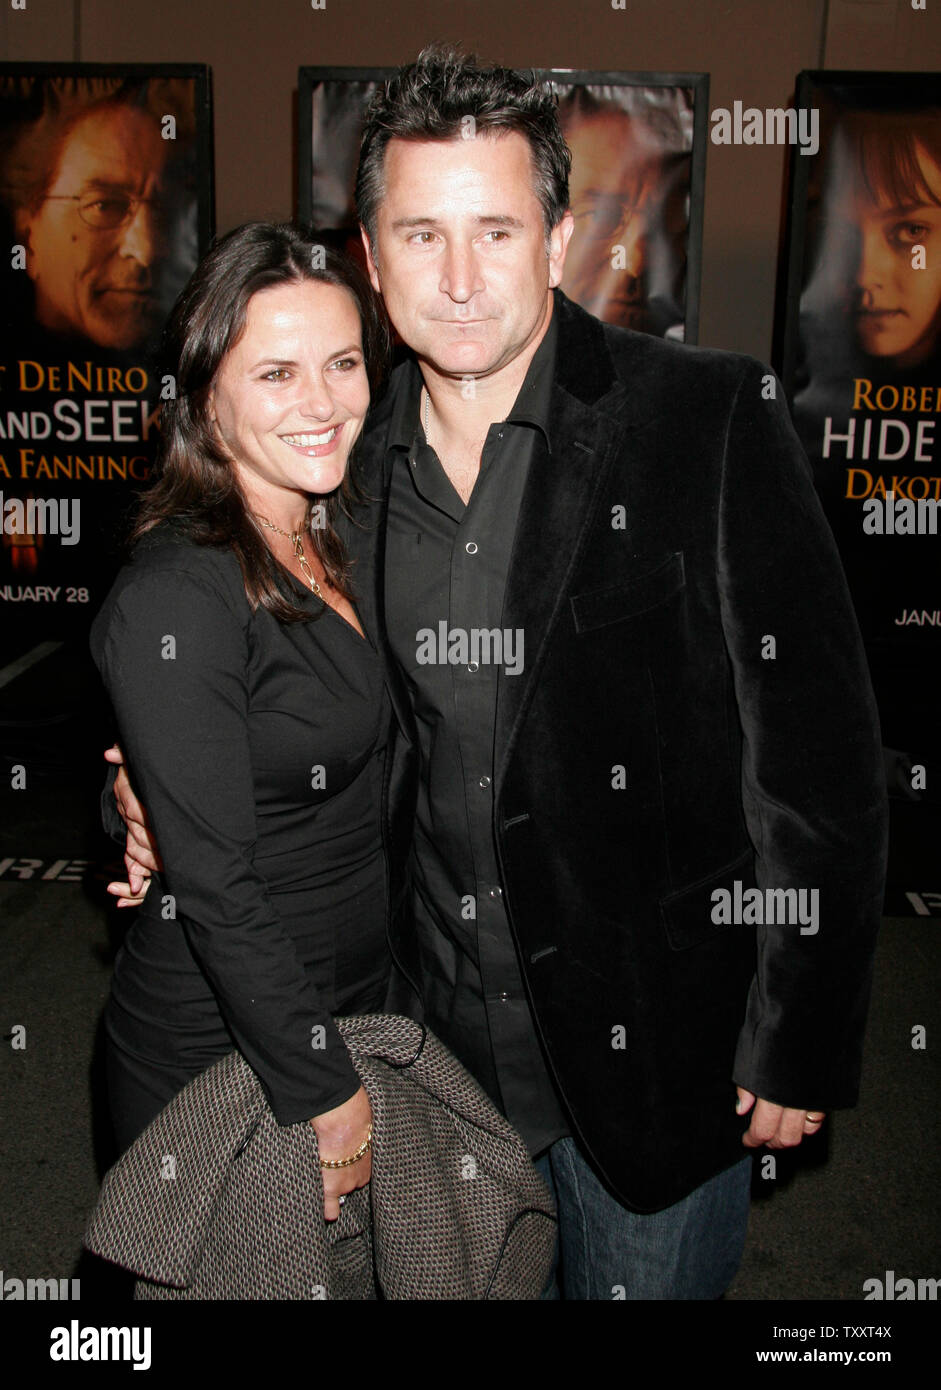 Actors Gia Carides,  left, and her husband, actor Anthony LaPaglia ,arrive at the January 24, 2005 Los Angeles premiere of the film, ' Hide And Seek', at the Zanuck Theater. The film opens in the US on January 28. (UPI Photo/Francis Specker) Stock Photo